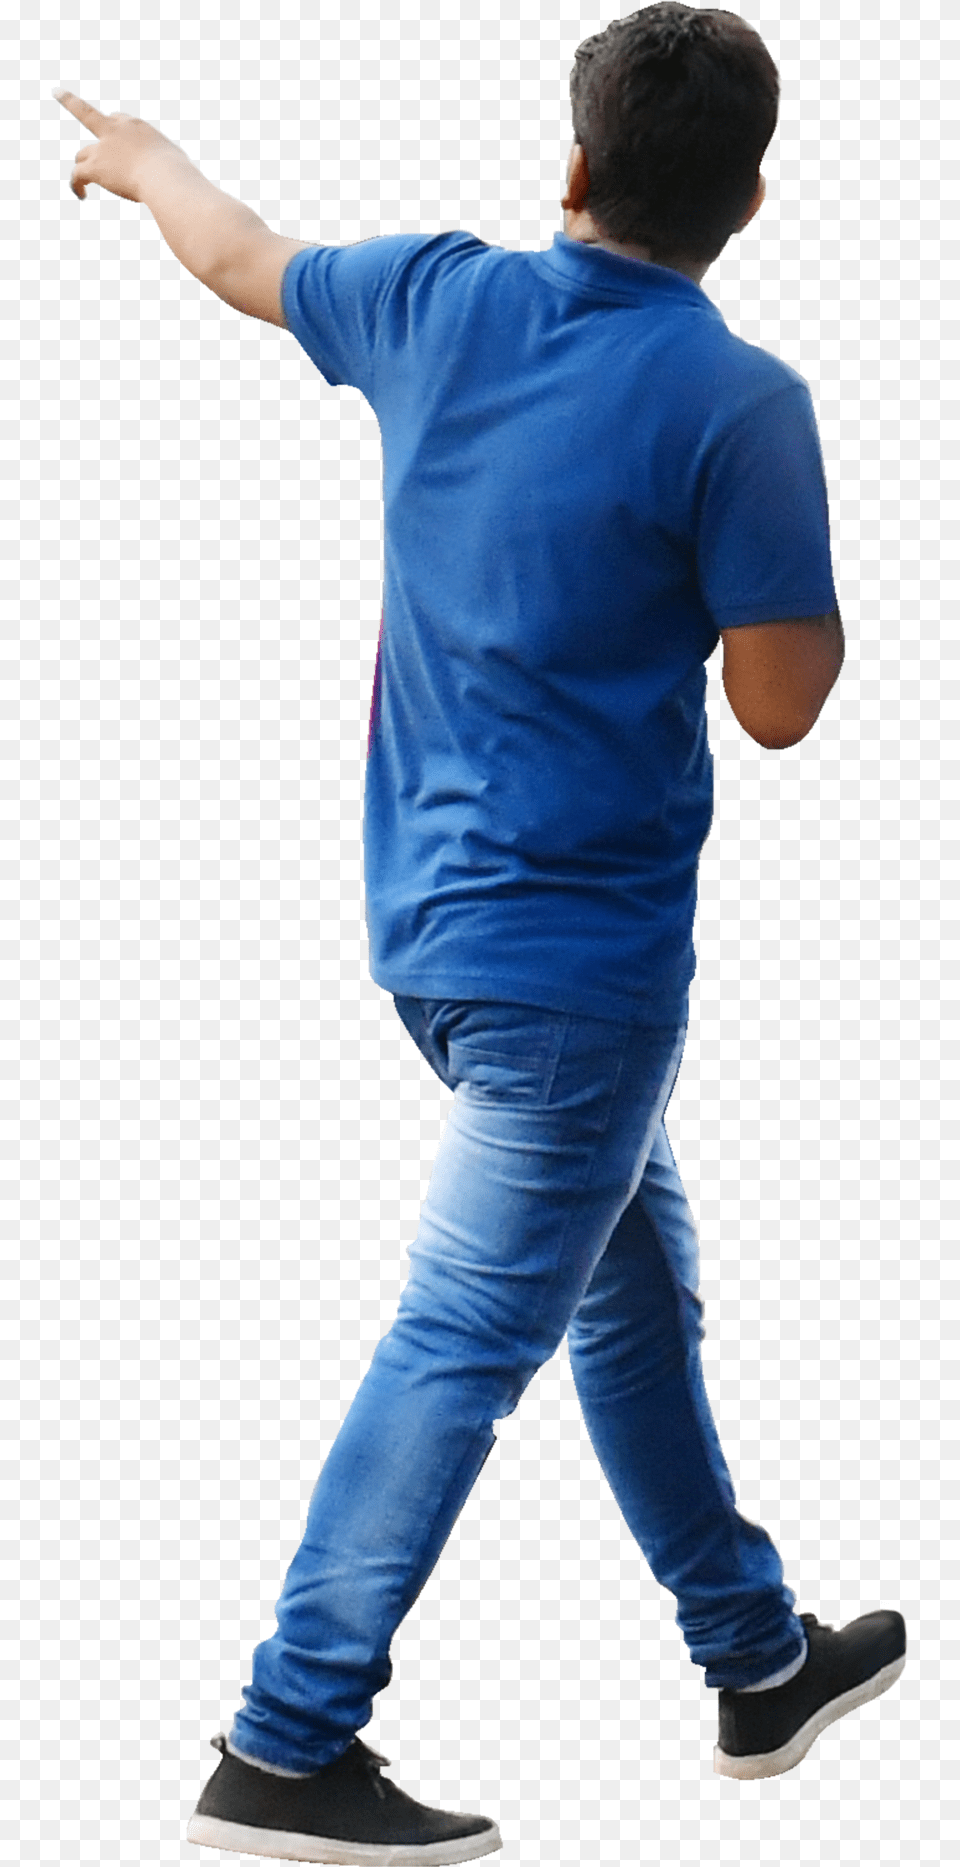 Indian Cutouts People Cutouts Indian People Cut Out, Adult, Clothing, Male, Man Png Image